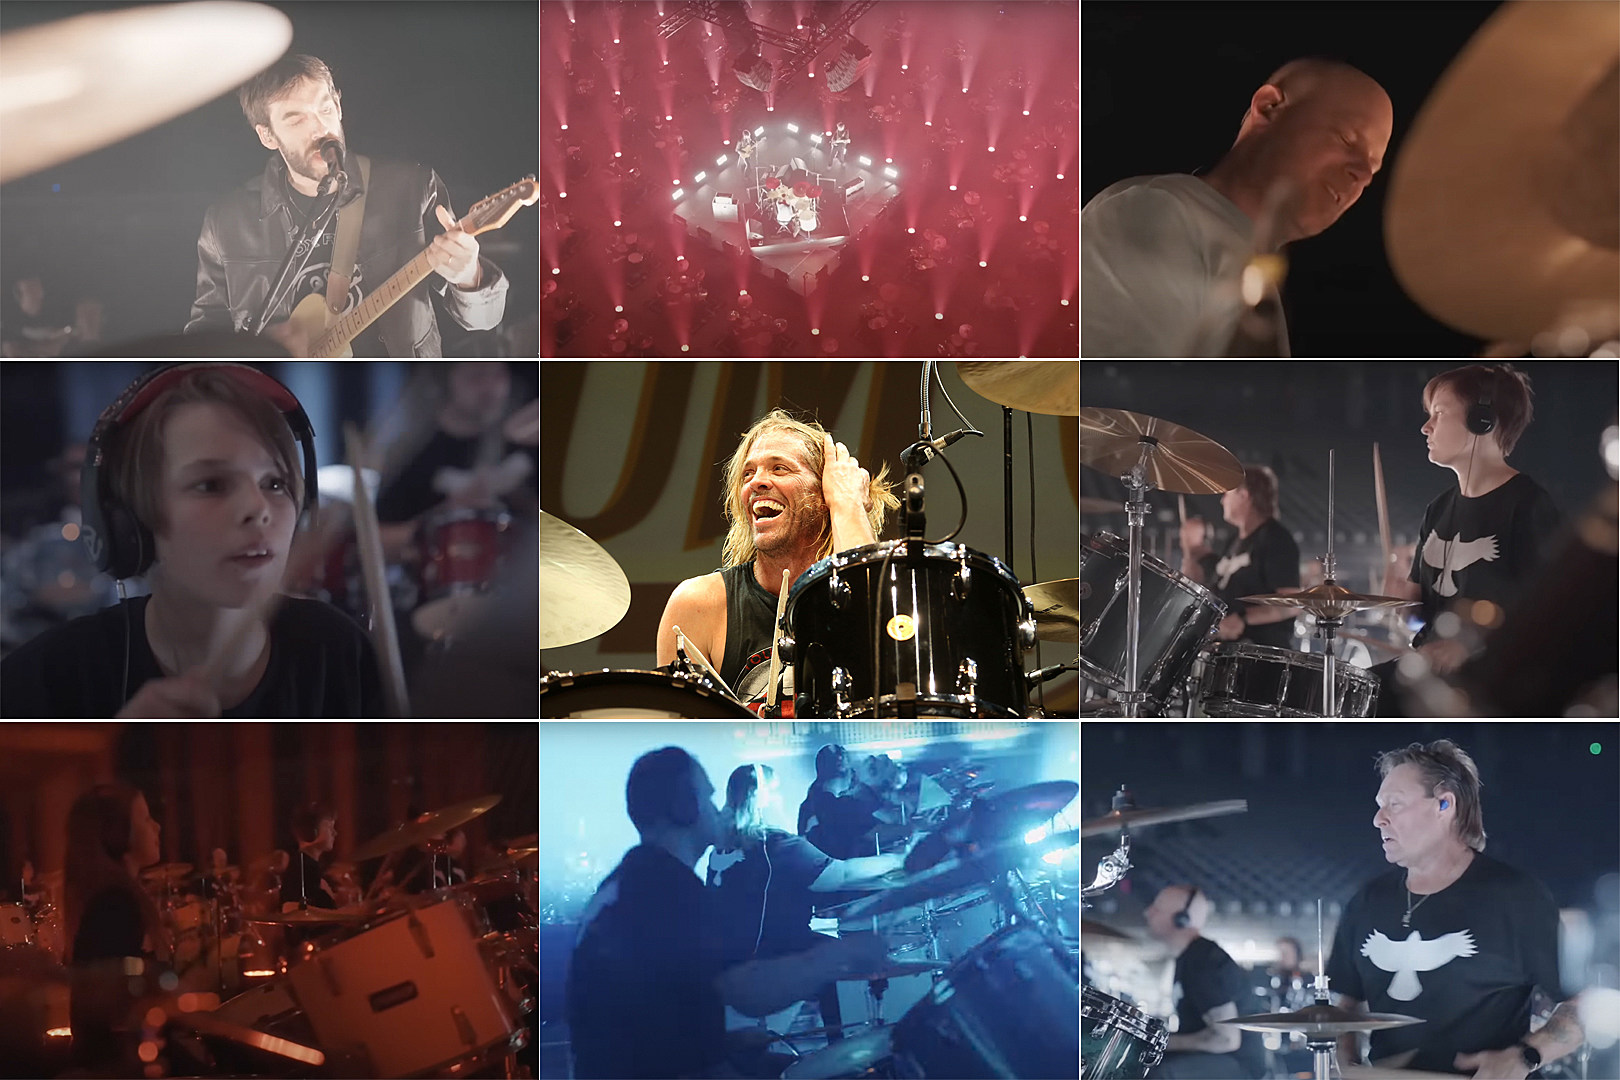 100 Drummers Join My Hero Tribute to Foo Fighter Taylor Hawkins